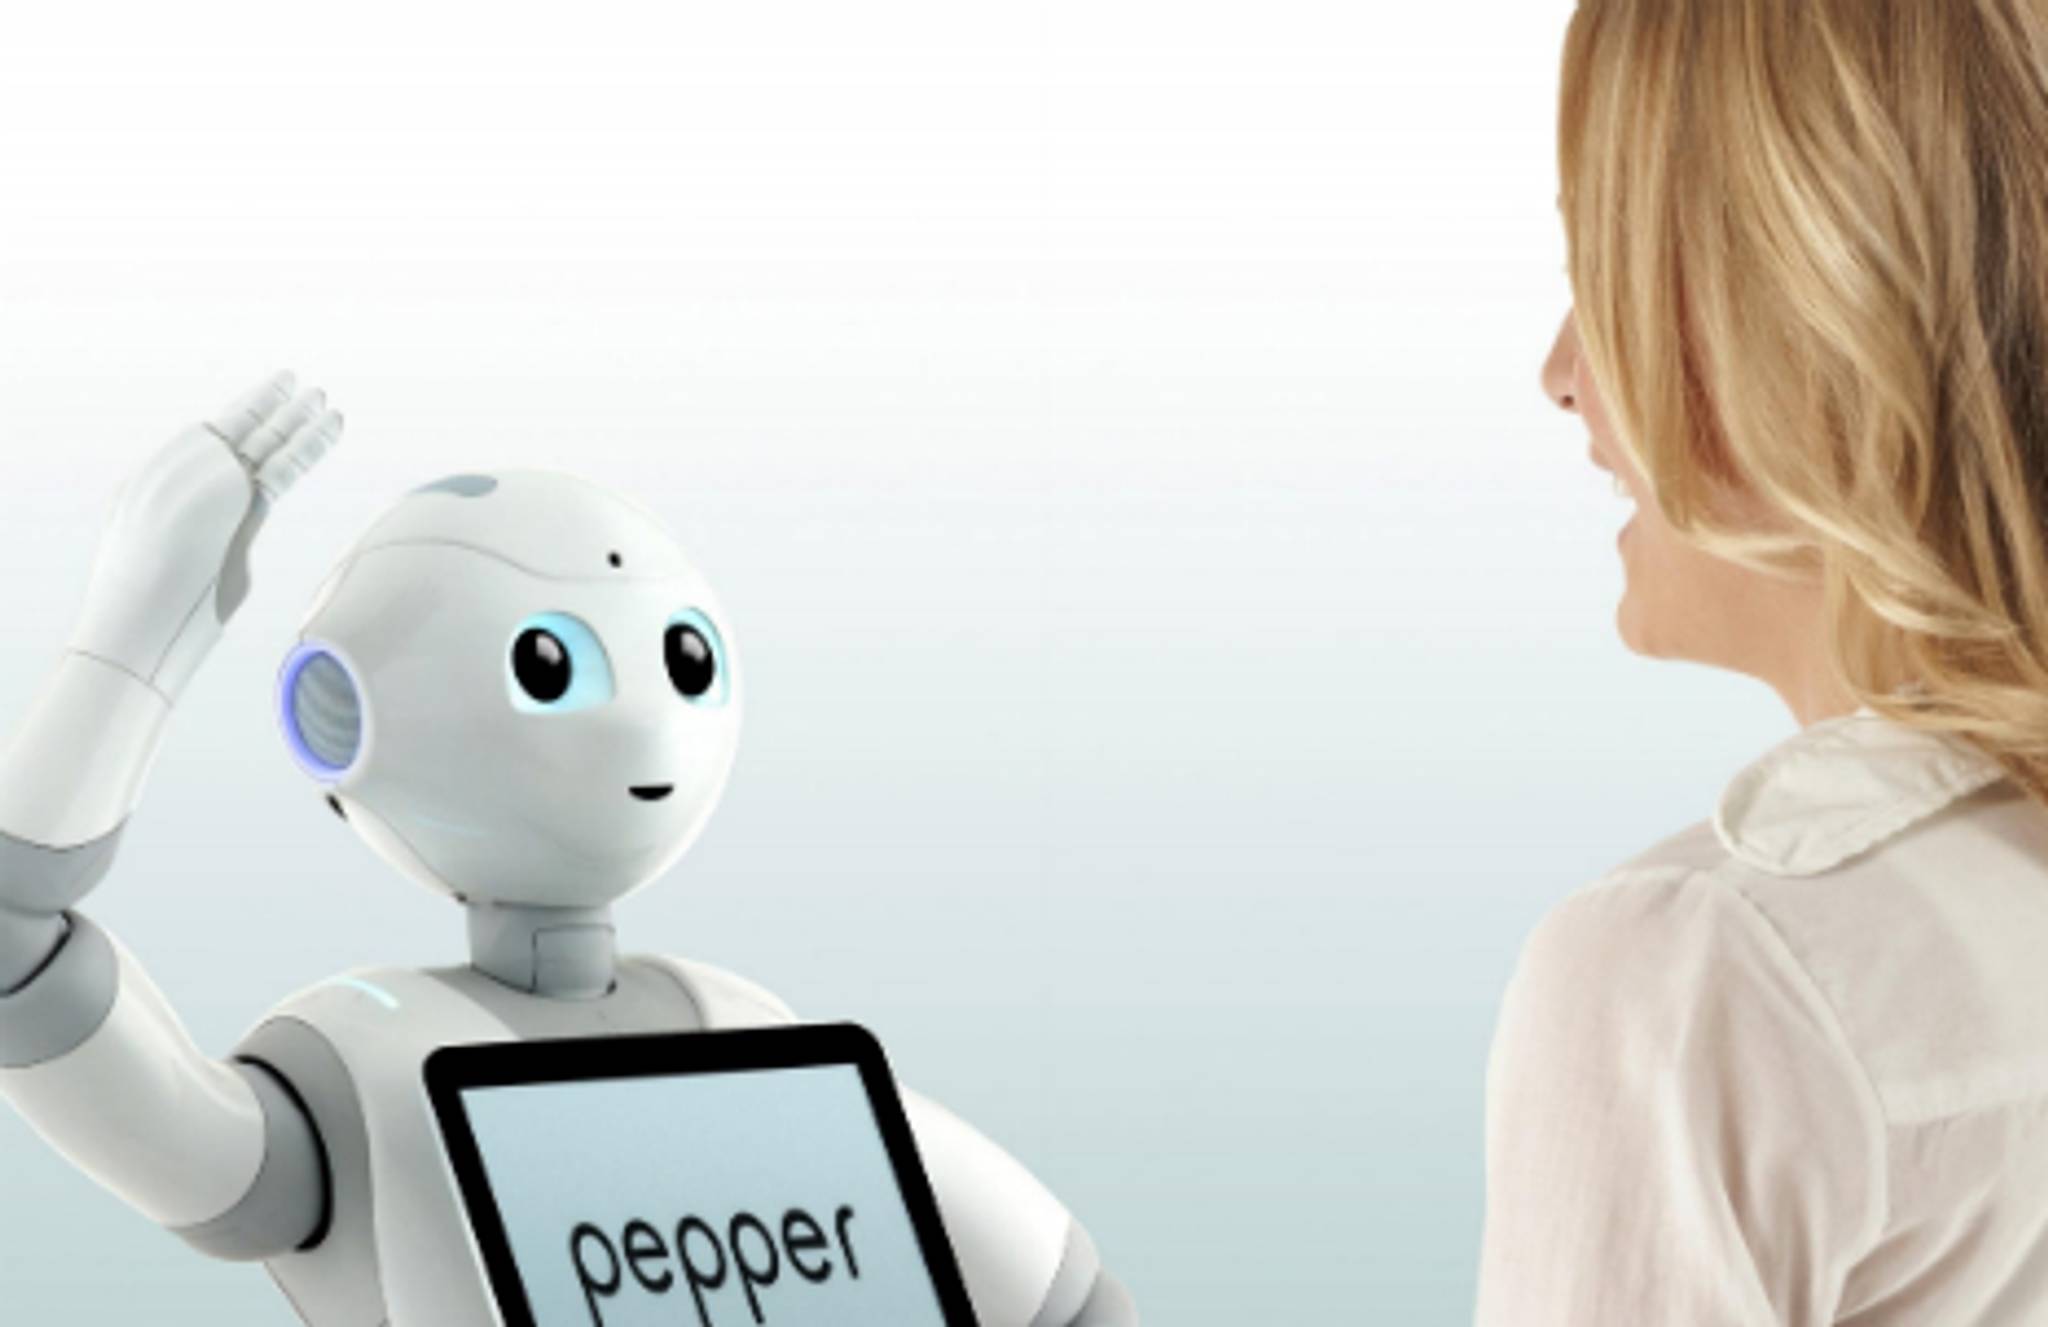 Will robots replace shop assistants?